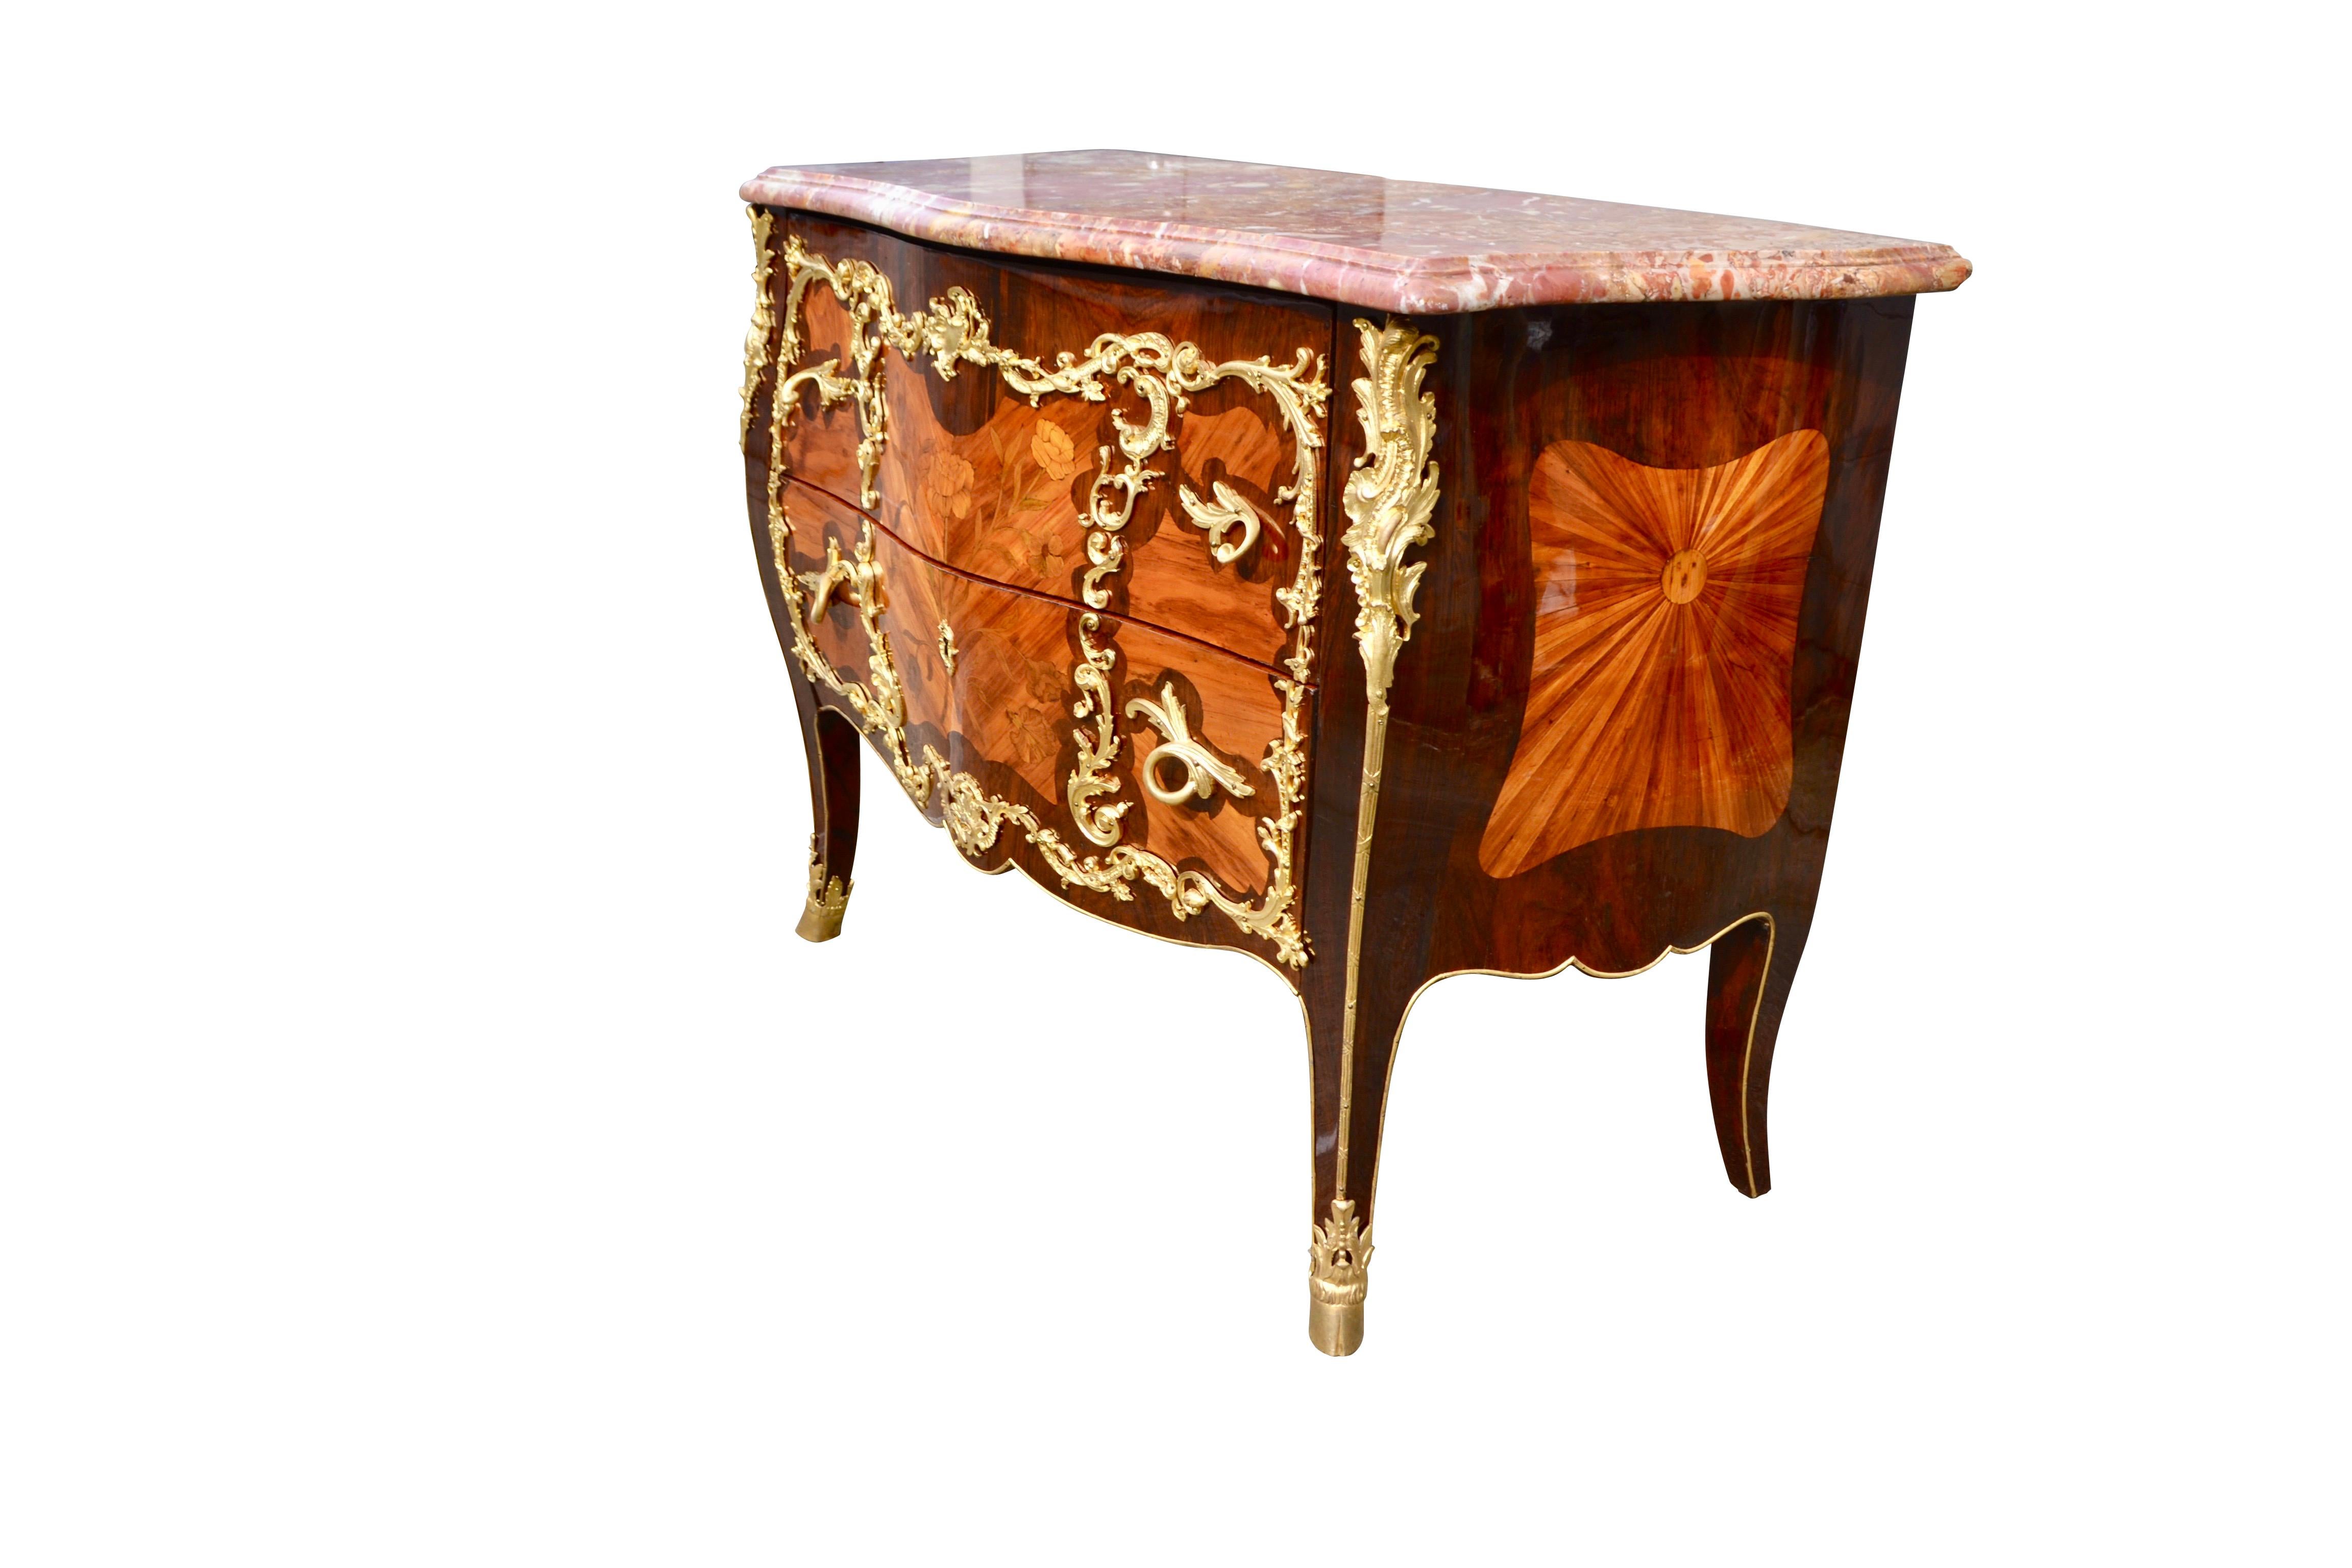 Kingwood 19th Century French Louis XV Style Marquetry and Ormolu Bombe Chest of Drawers For Sale